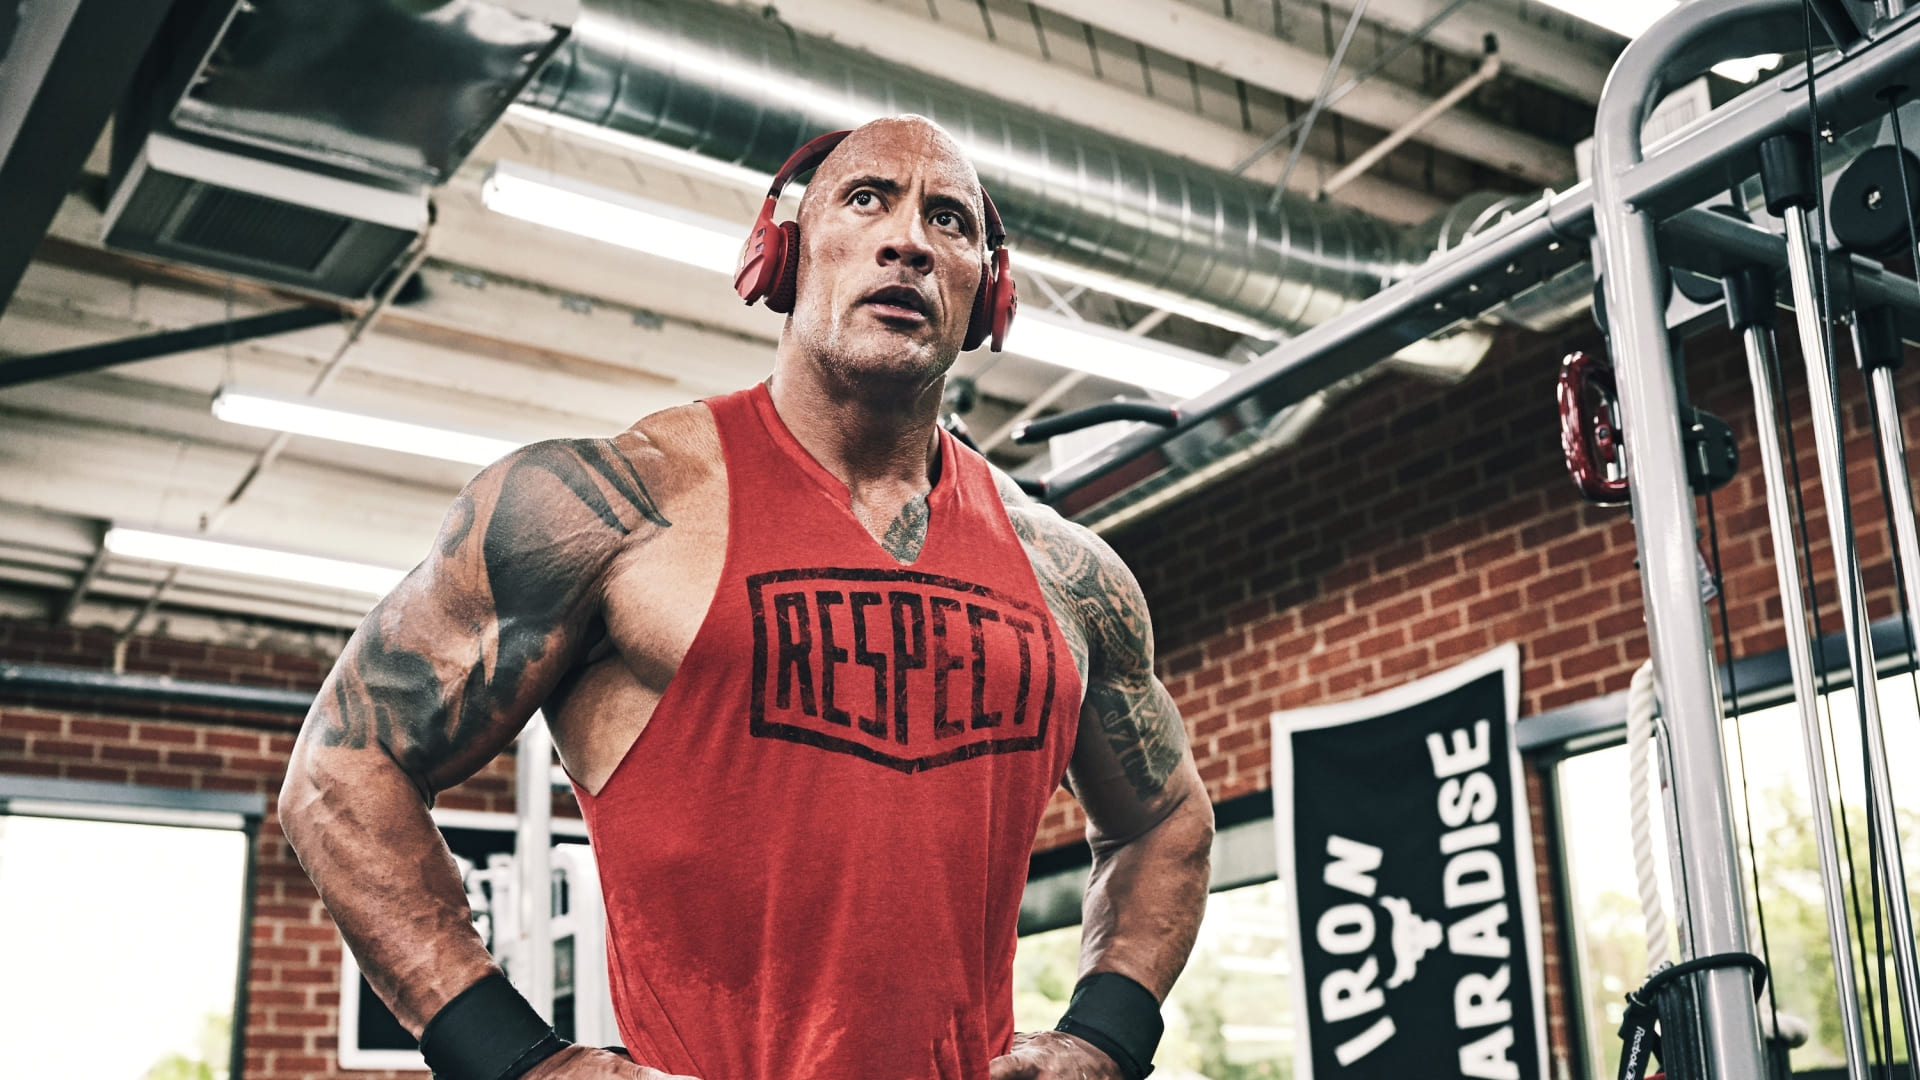 1920x1080 Dwayne Johnson Wallpapers Top 45 The Rock Backgrounds Download